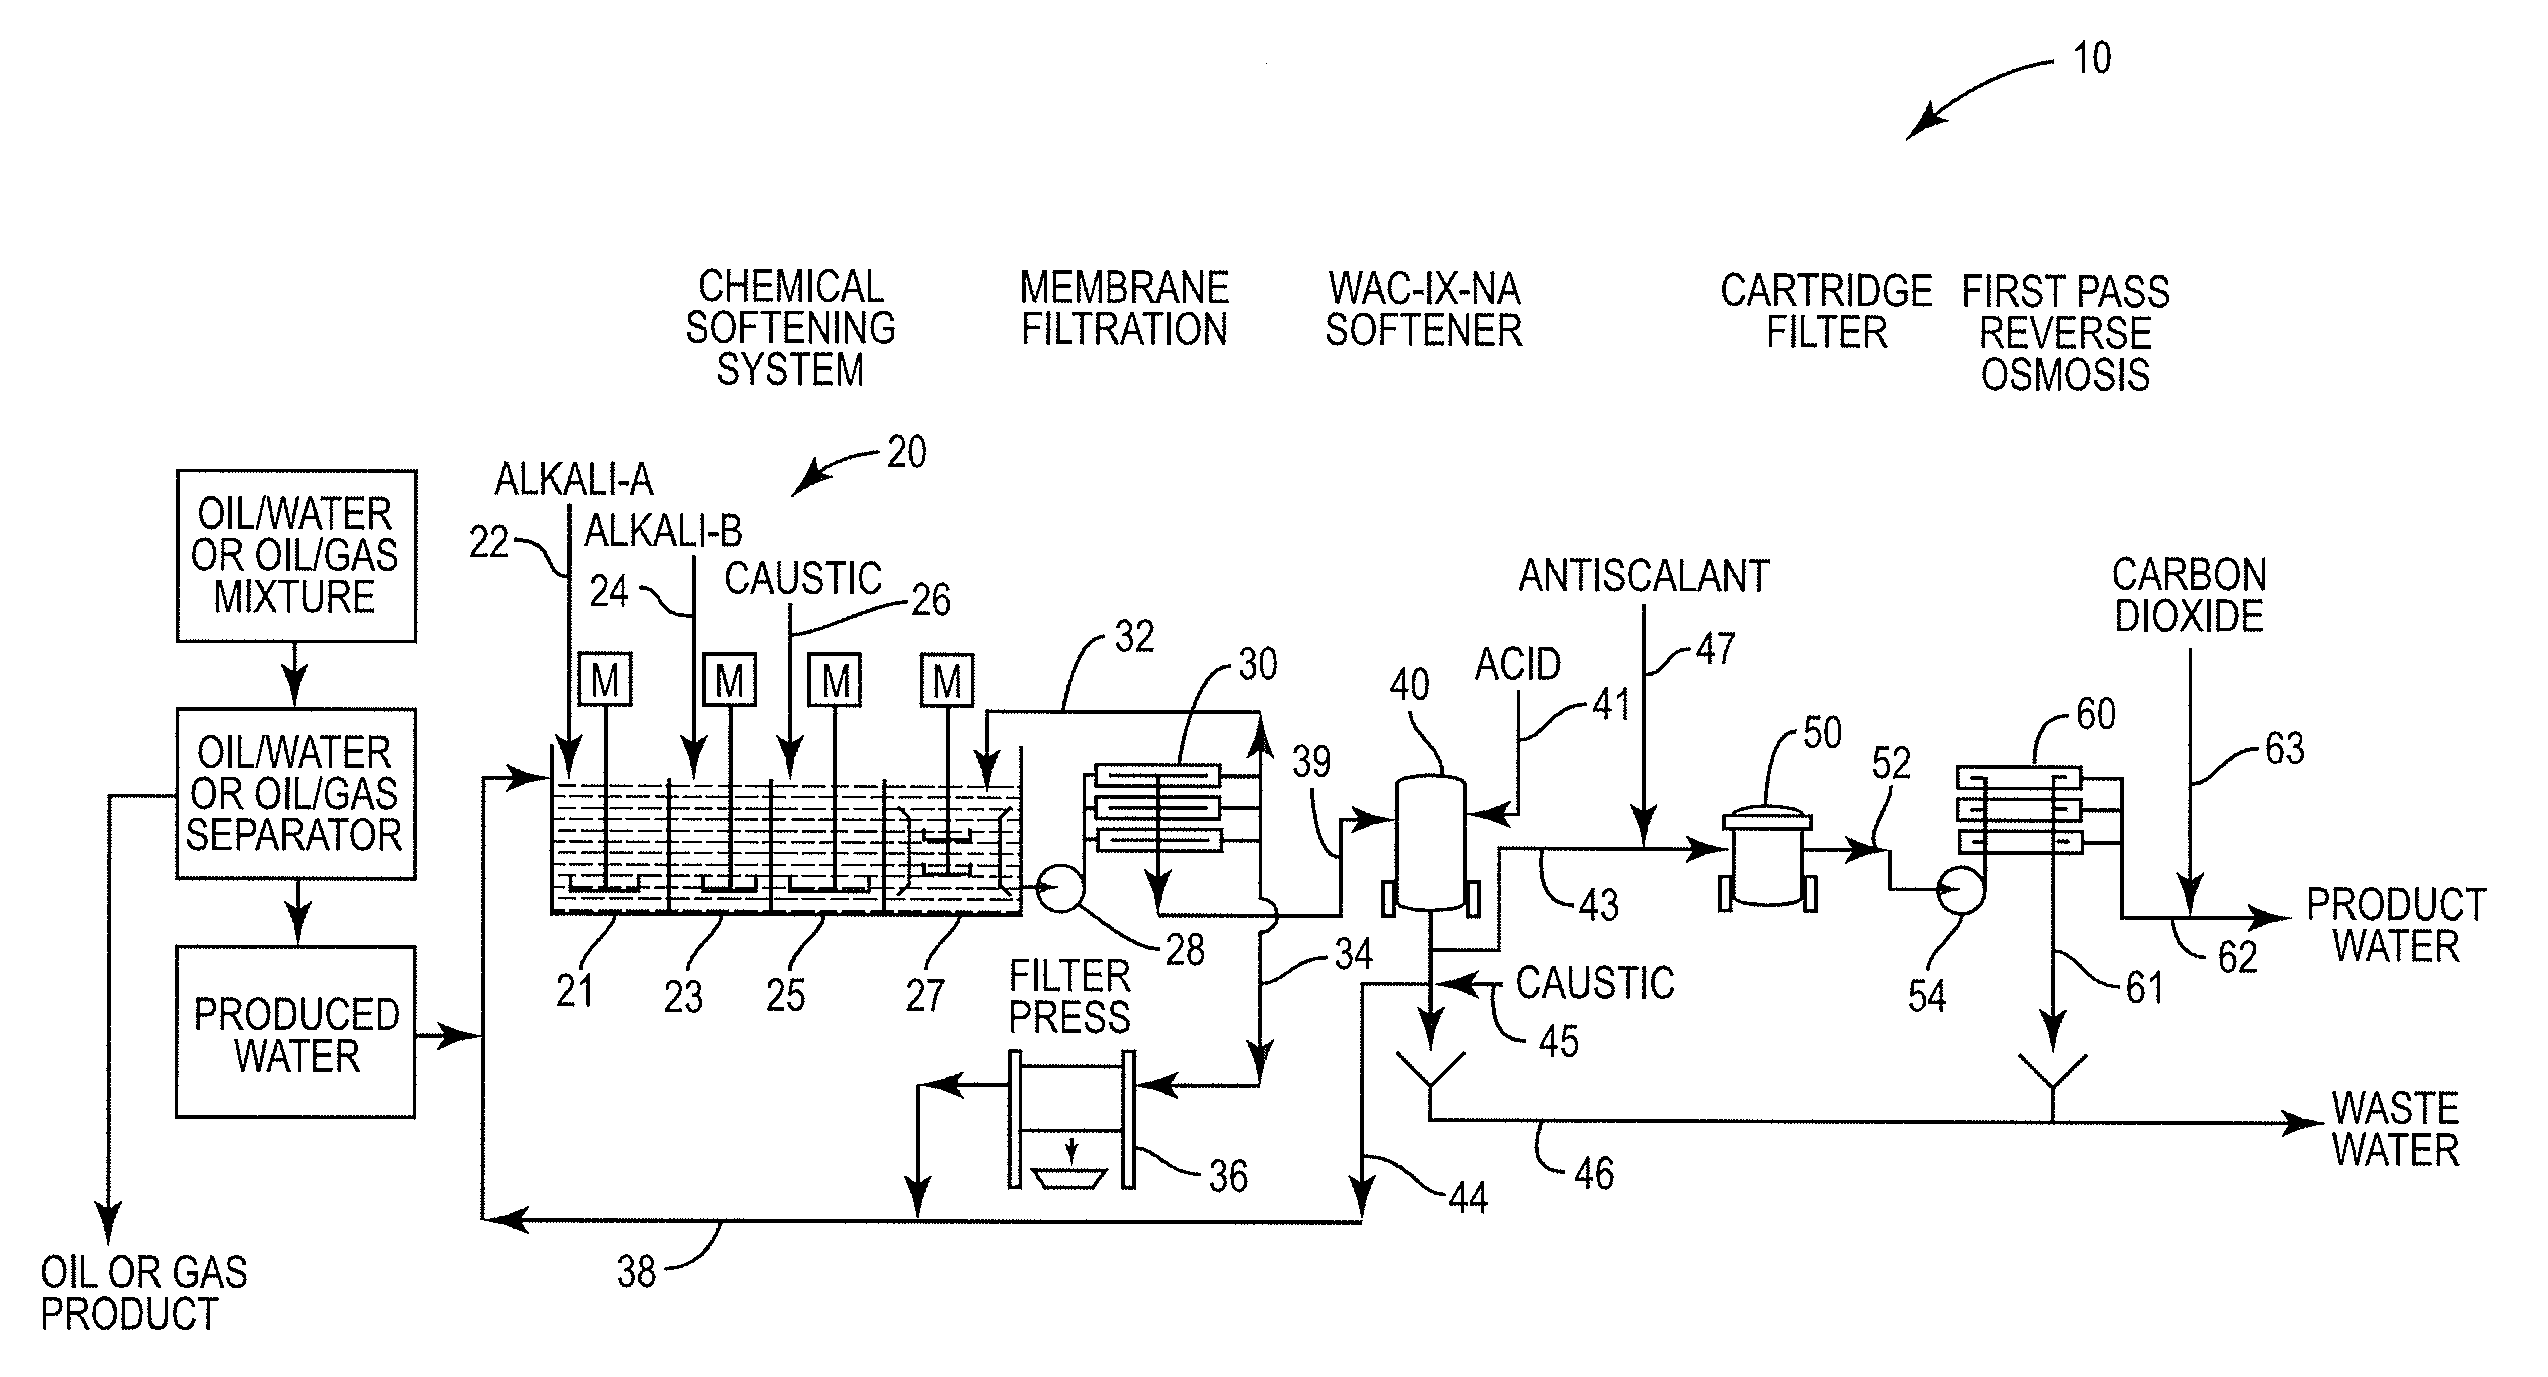 Method of Recovering Oil or Gas and Treating the Resulting Produced Water